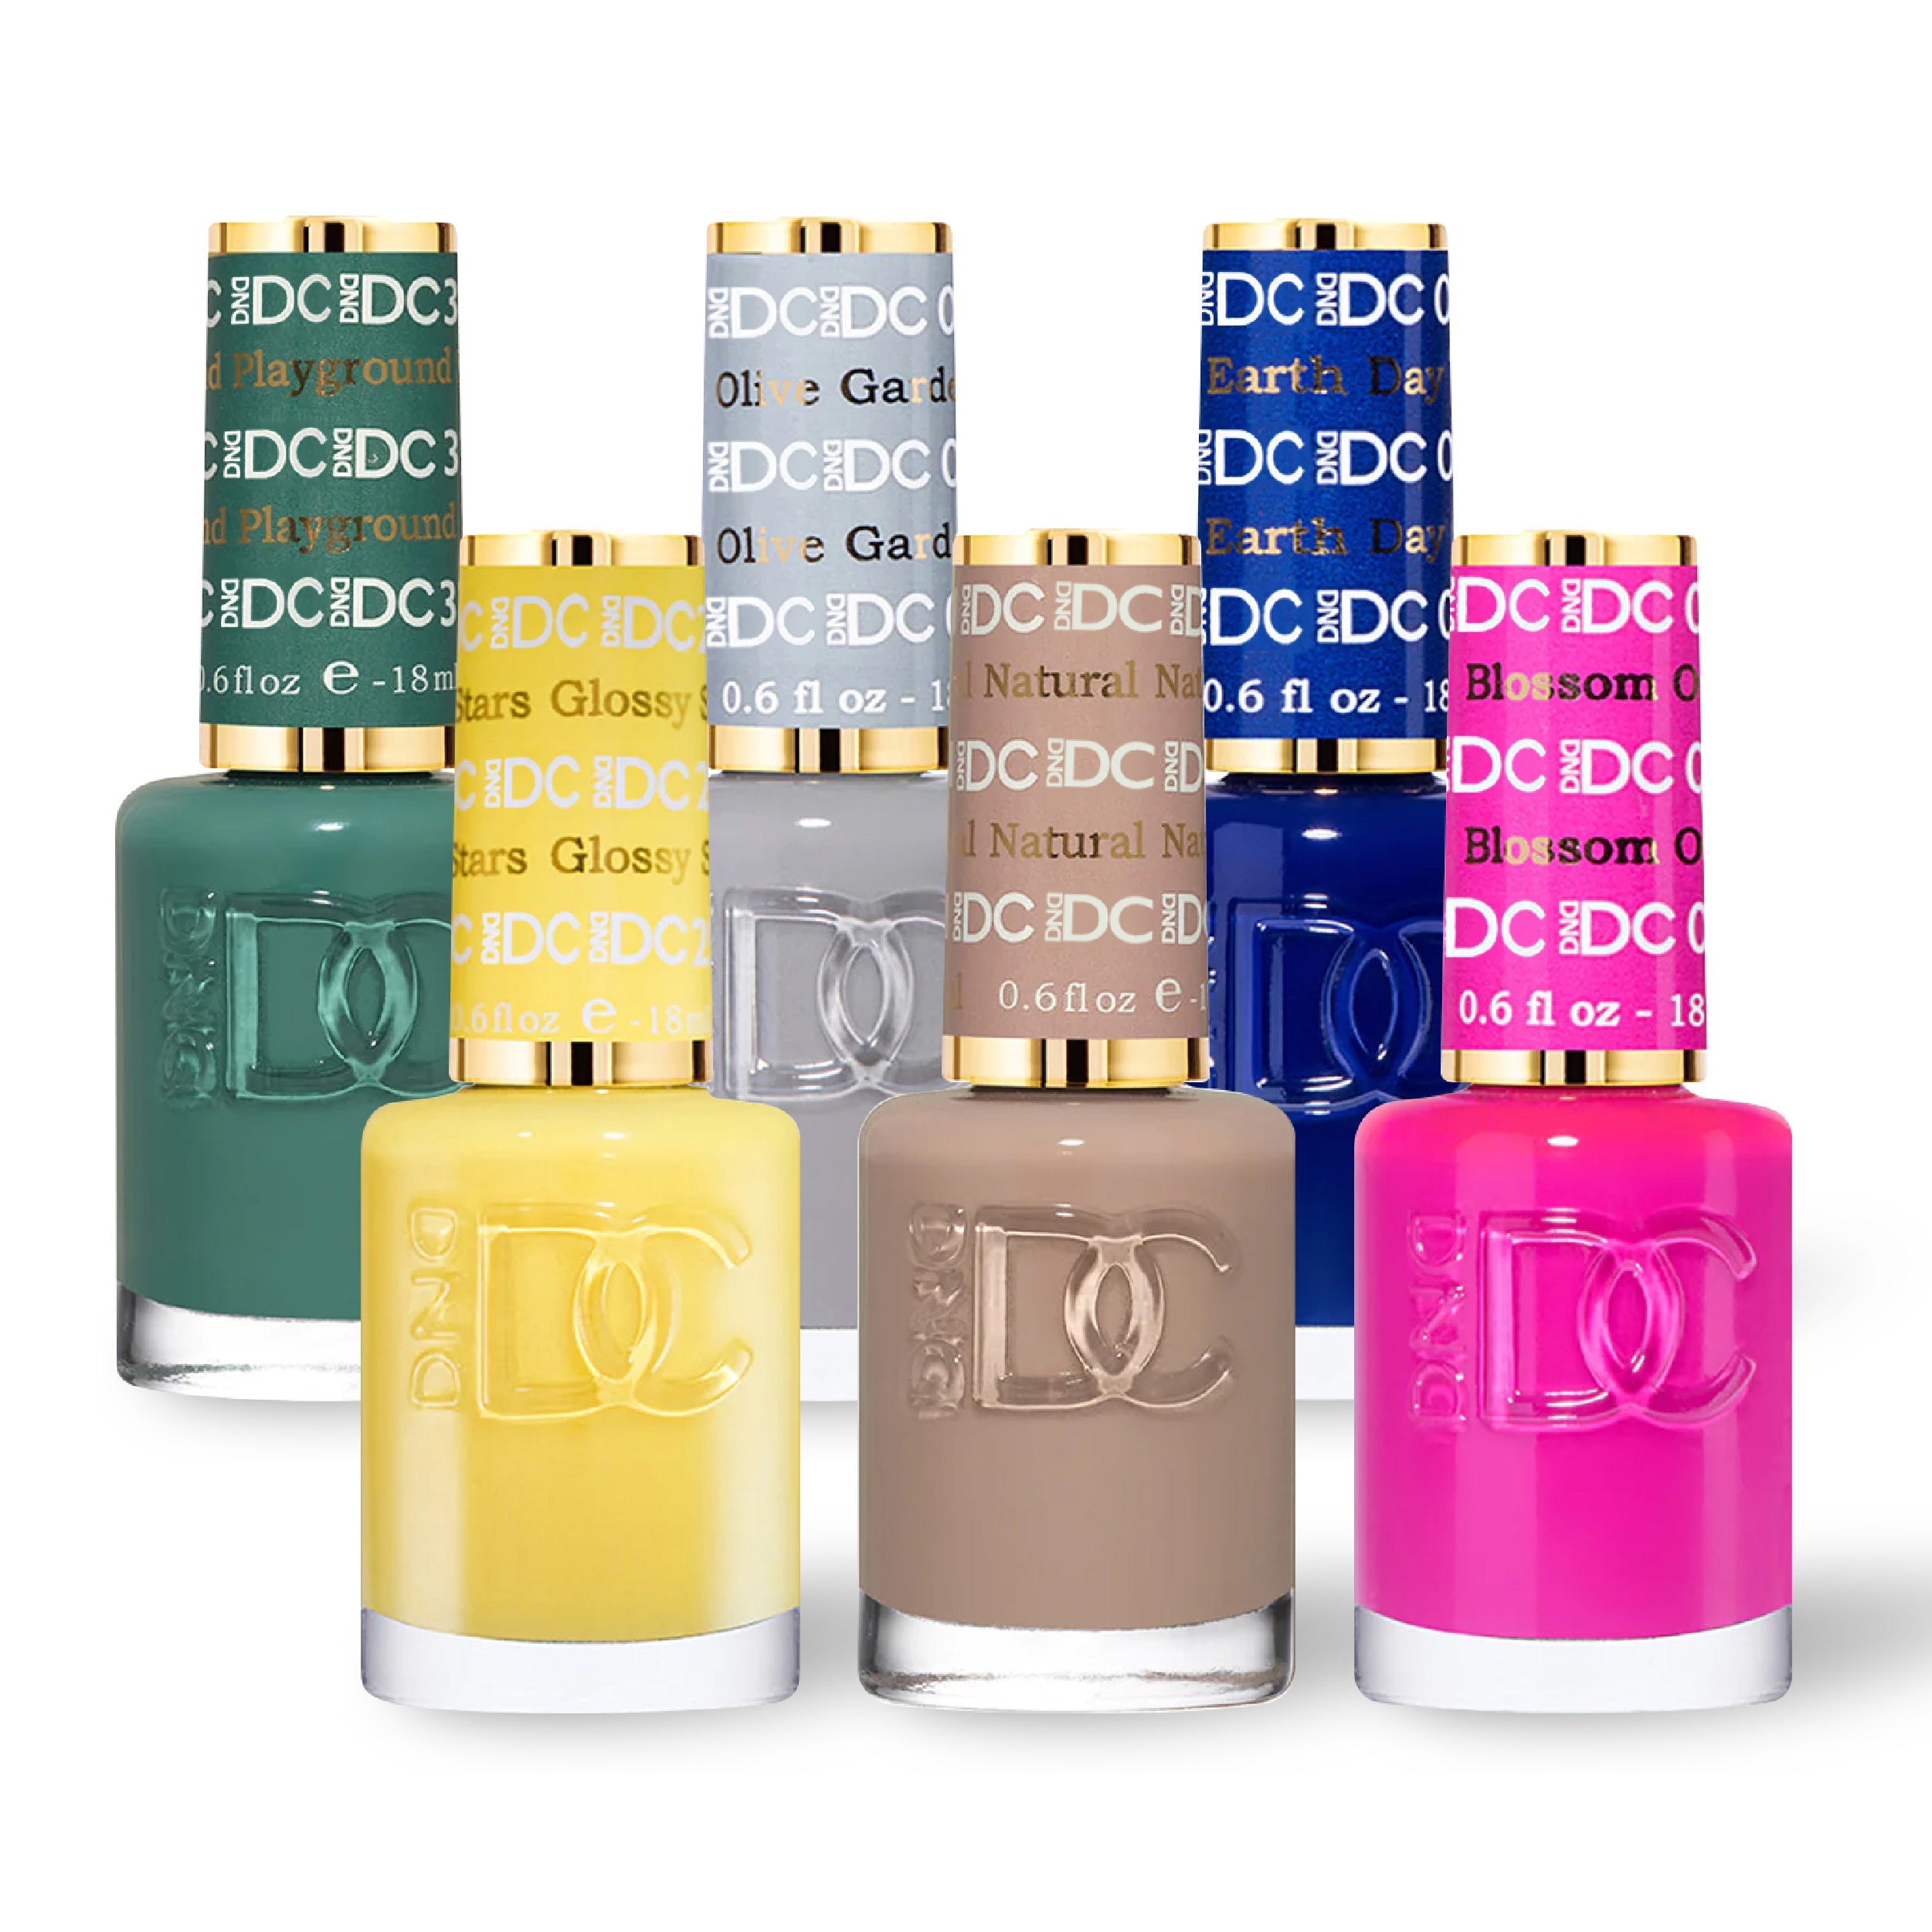 DND DC 6 Nail Lacquer - Set 5 GREEN, GRAY, BLUE, YELLOW, BROWN & PINK